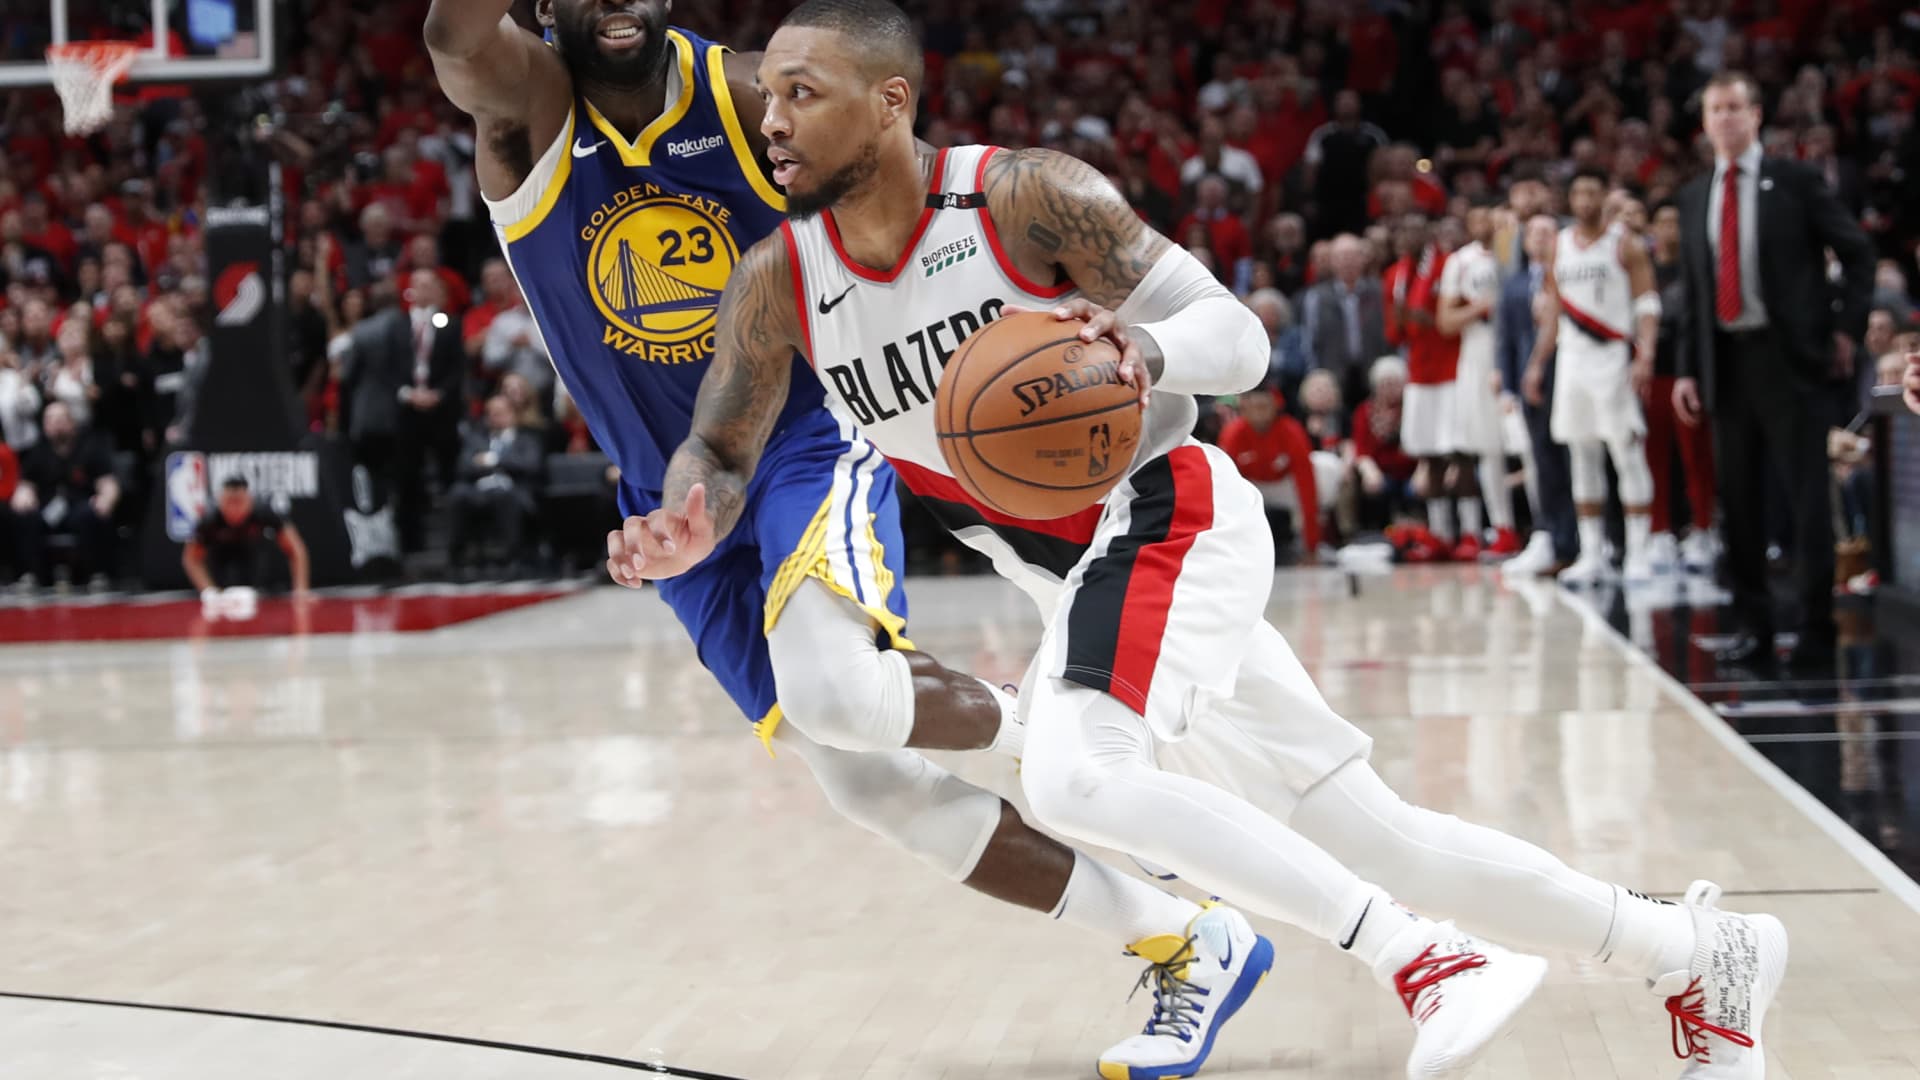 Golden State Warriors' Draymond Green guards Portland Trail Blazers' Damian Lillard in final seconds of Warriors' 119-117 overtime win in NBA Western Conference Finals' Game 4 at Moda Center in Portland, Oregon on Monday, May 20, 2019.